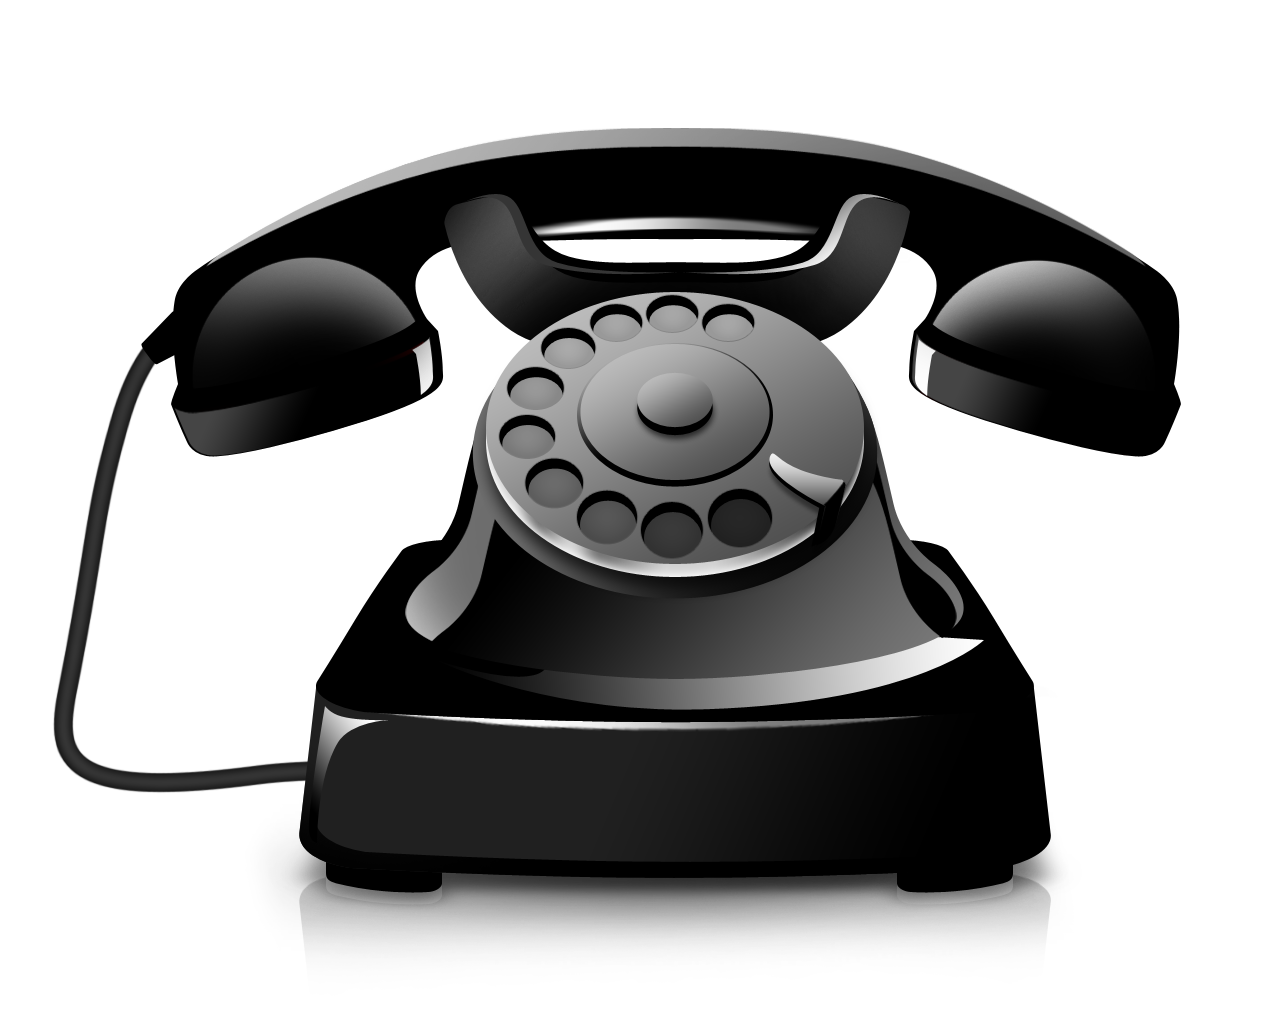 Download PNG image - Telephon